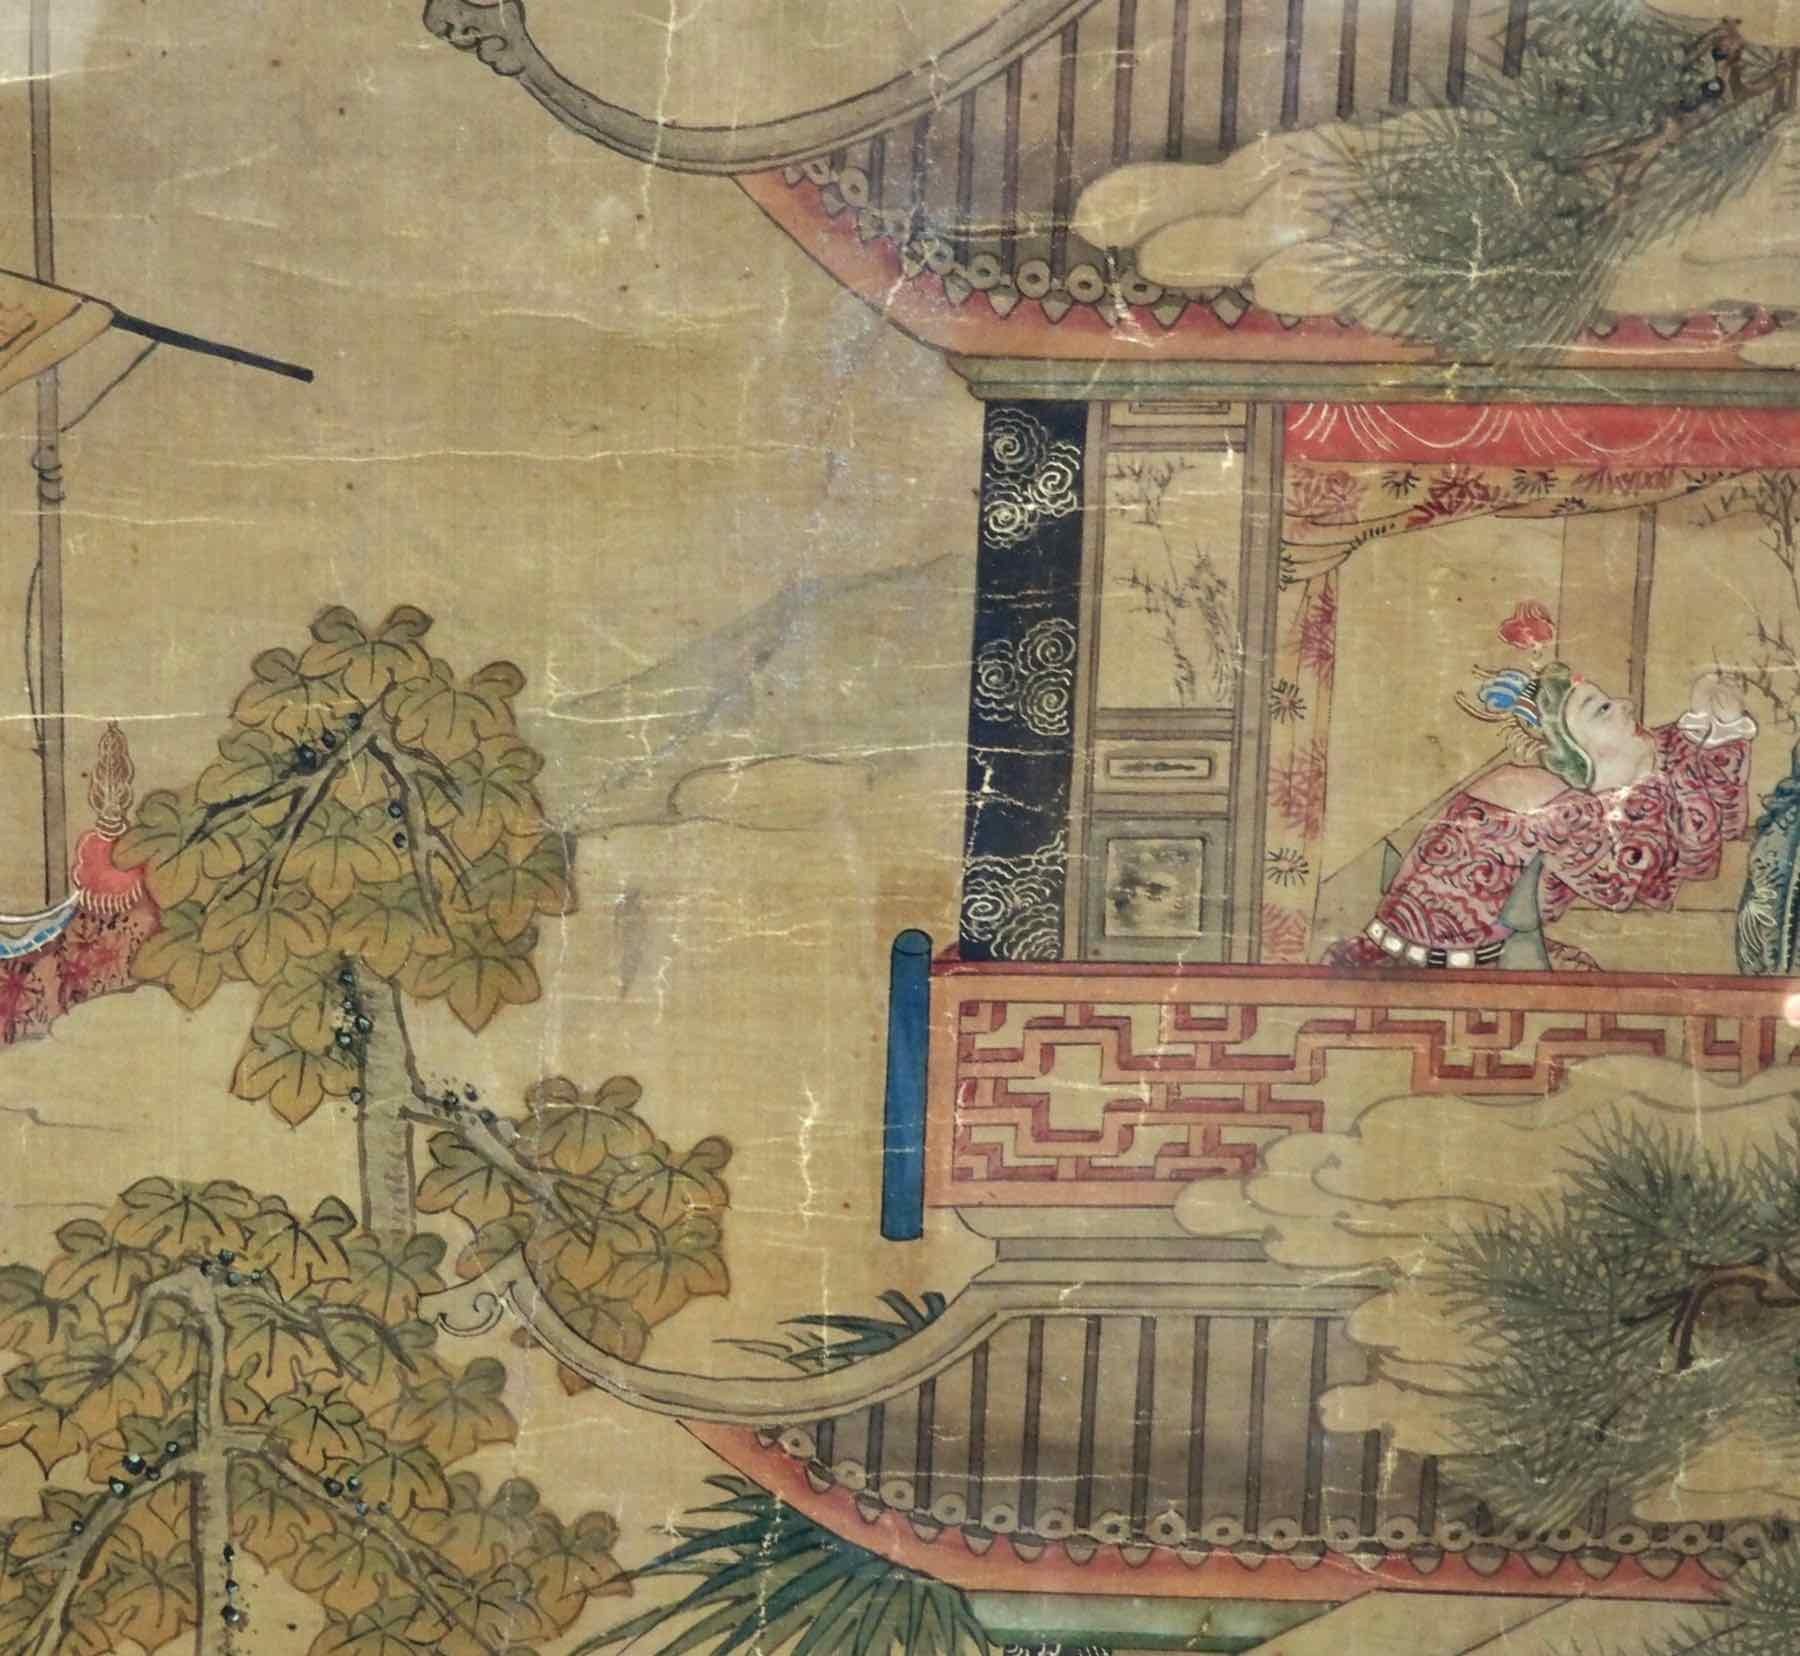 Beautiful Chinese painting, 18th century.
Measures: H. 32, W. 45 cm
H. 12.5, W. 17.7 in.